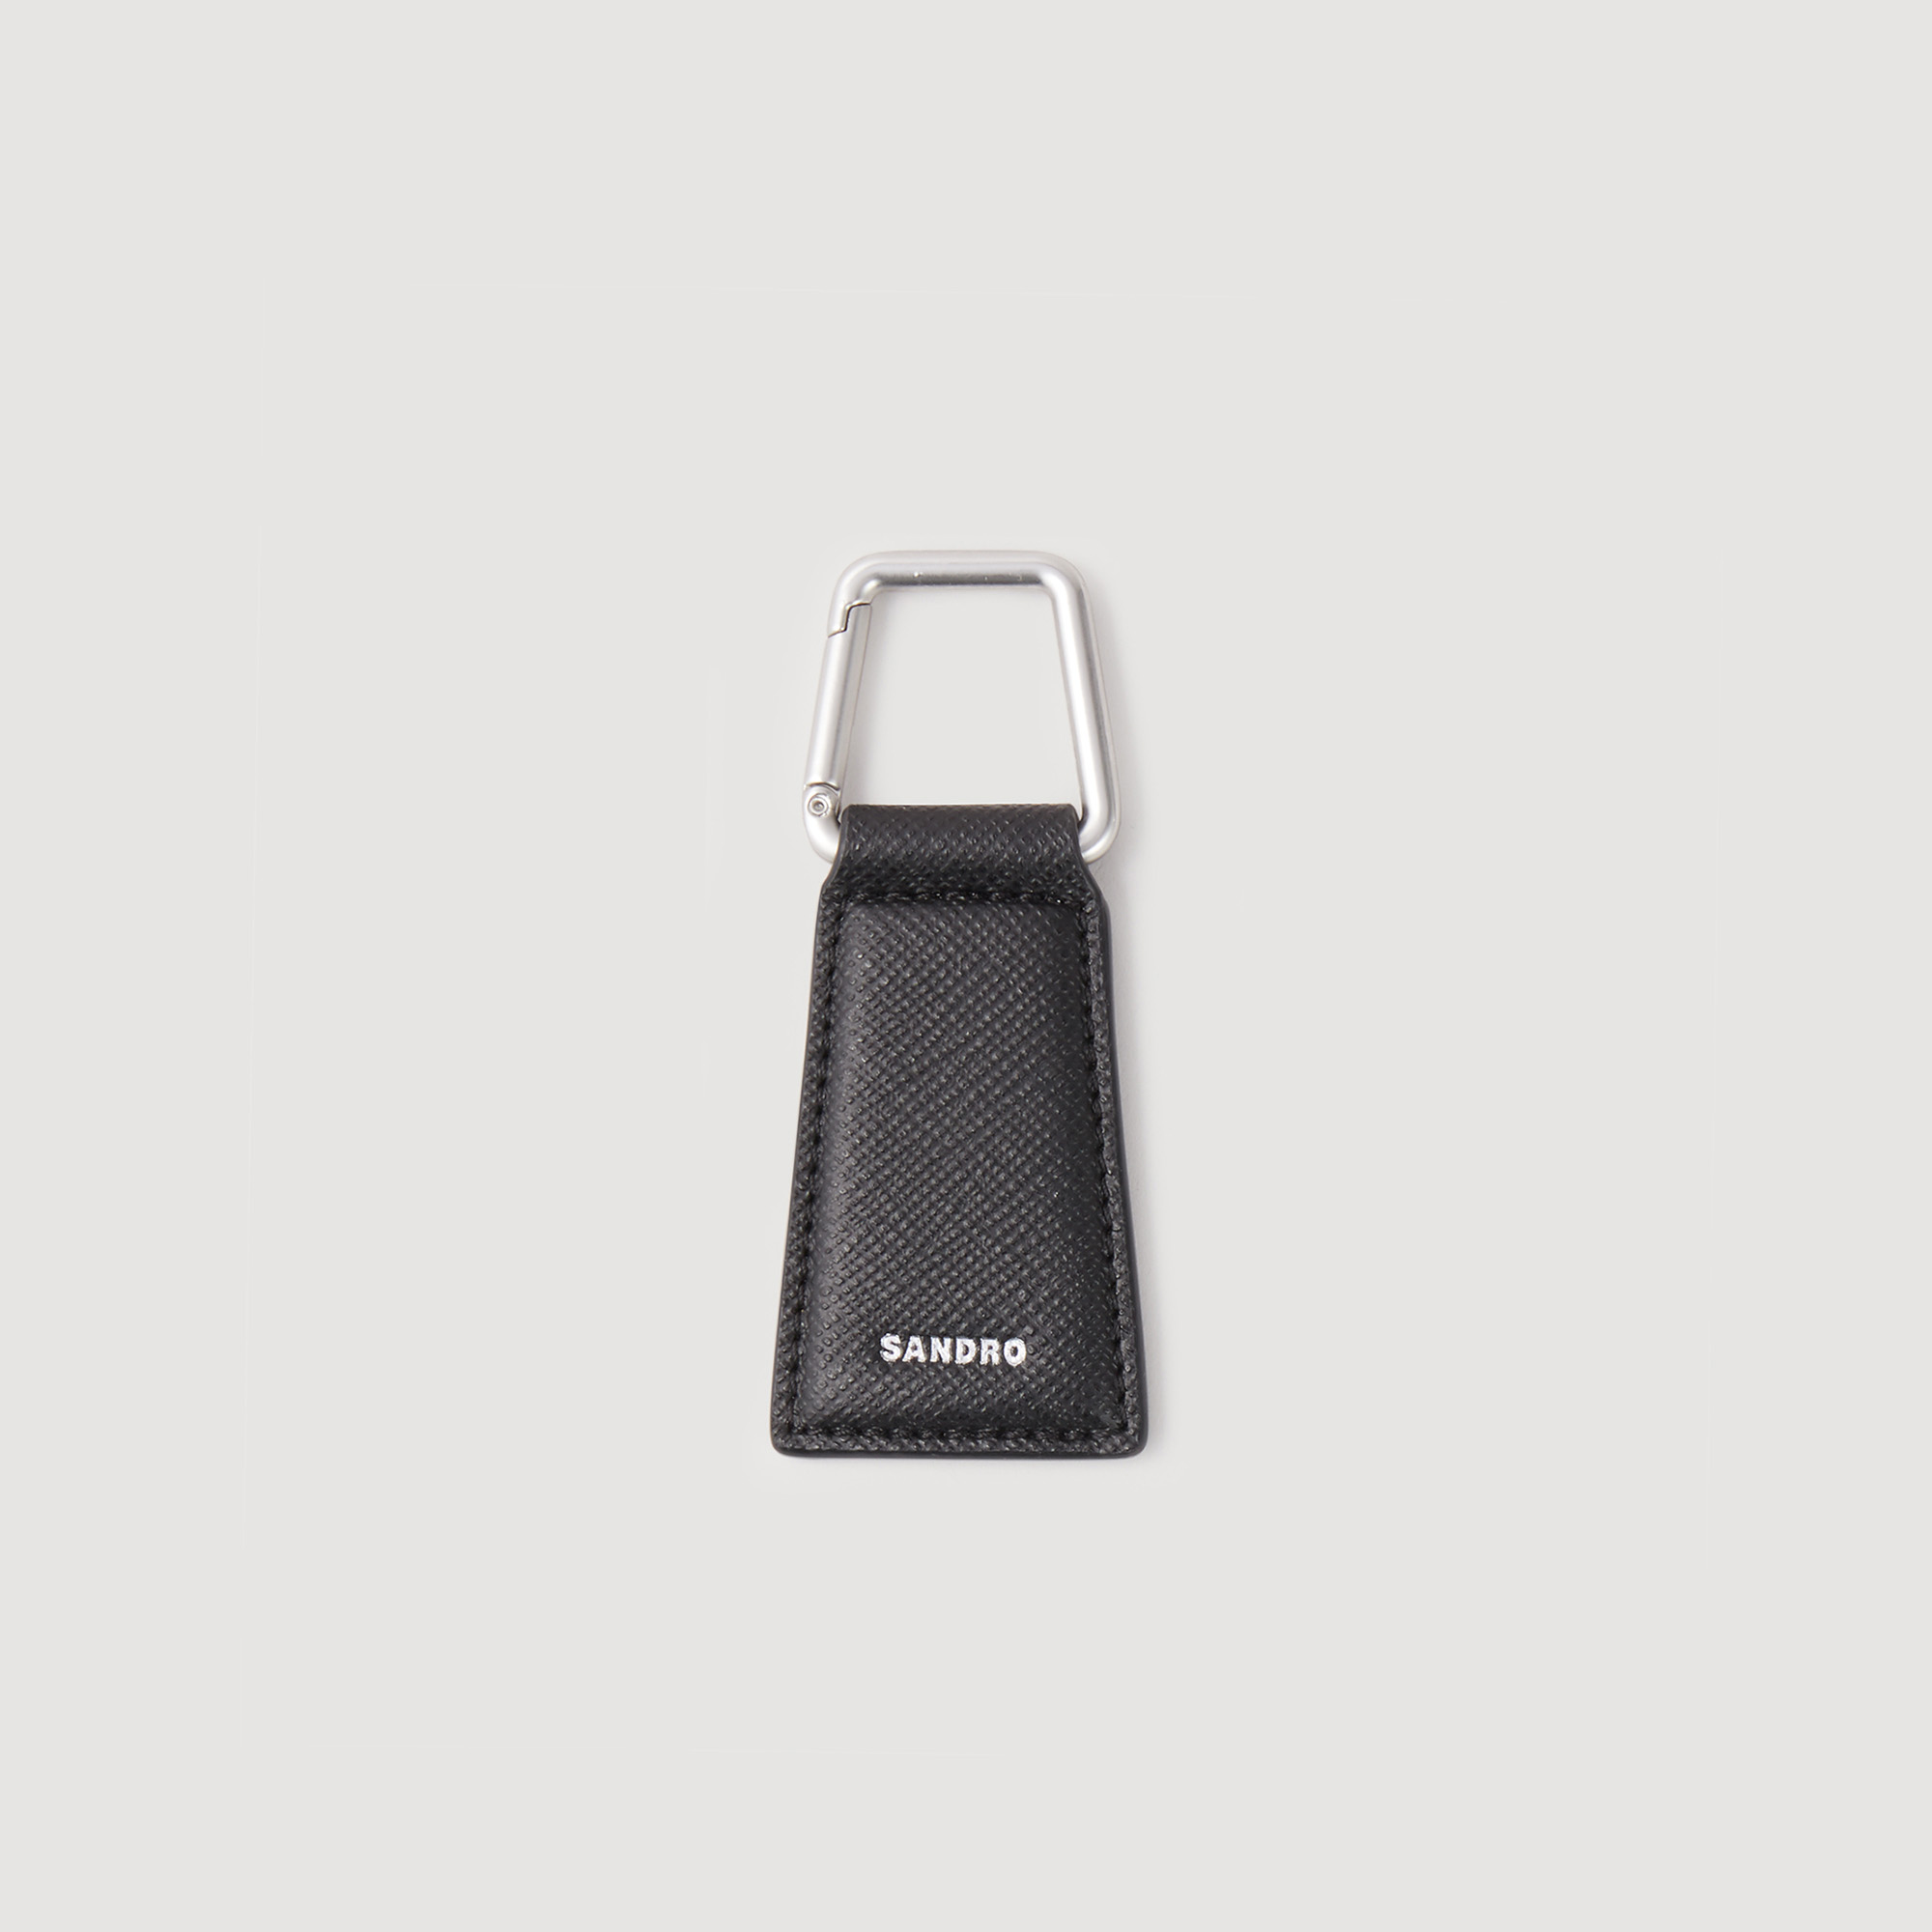 Sandro synderm Coating: Key ring in saffiano leather embellished with Sandro lettering and fitted with a metal lobster clasp